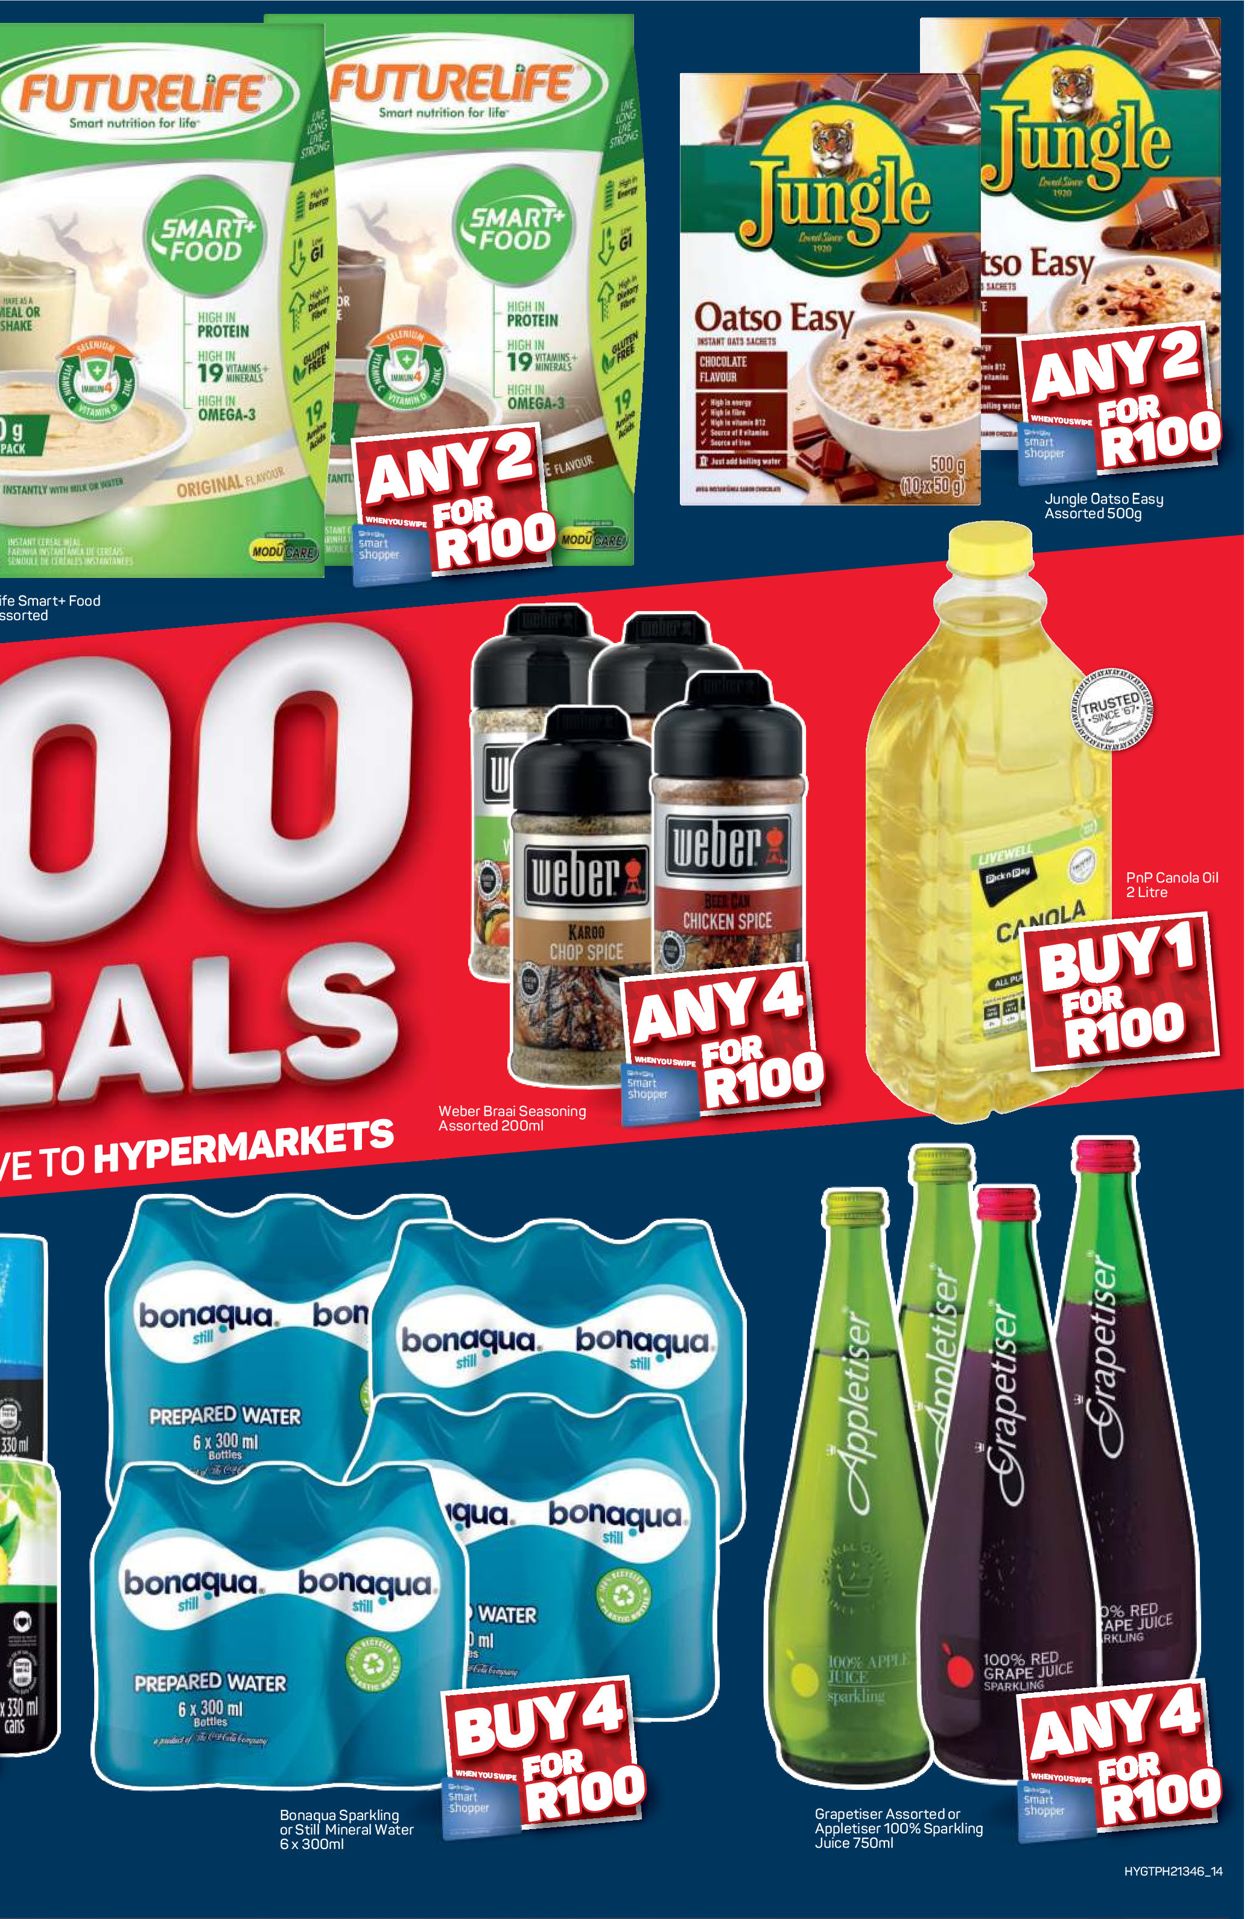 Pick n Pay Catalogue - 2022/08/29-2022/09/11 (Page 15)